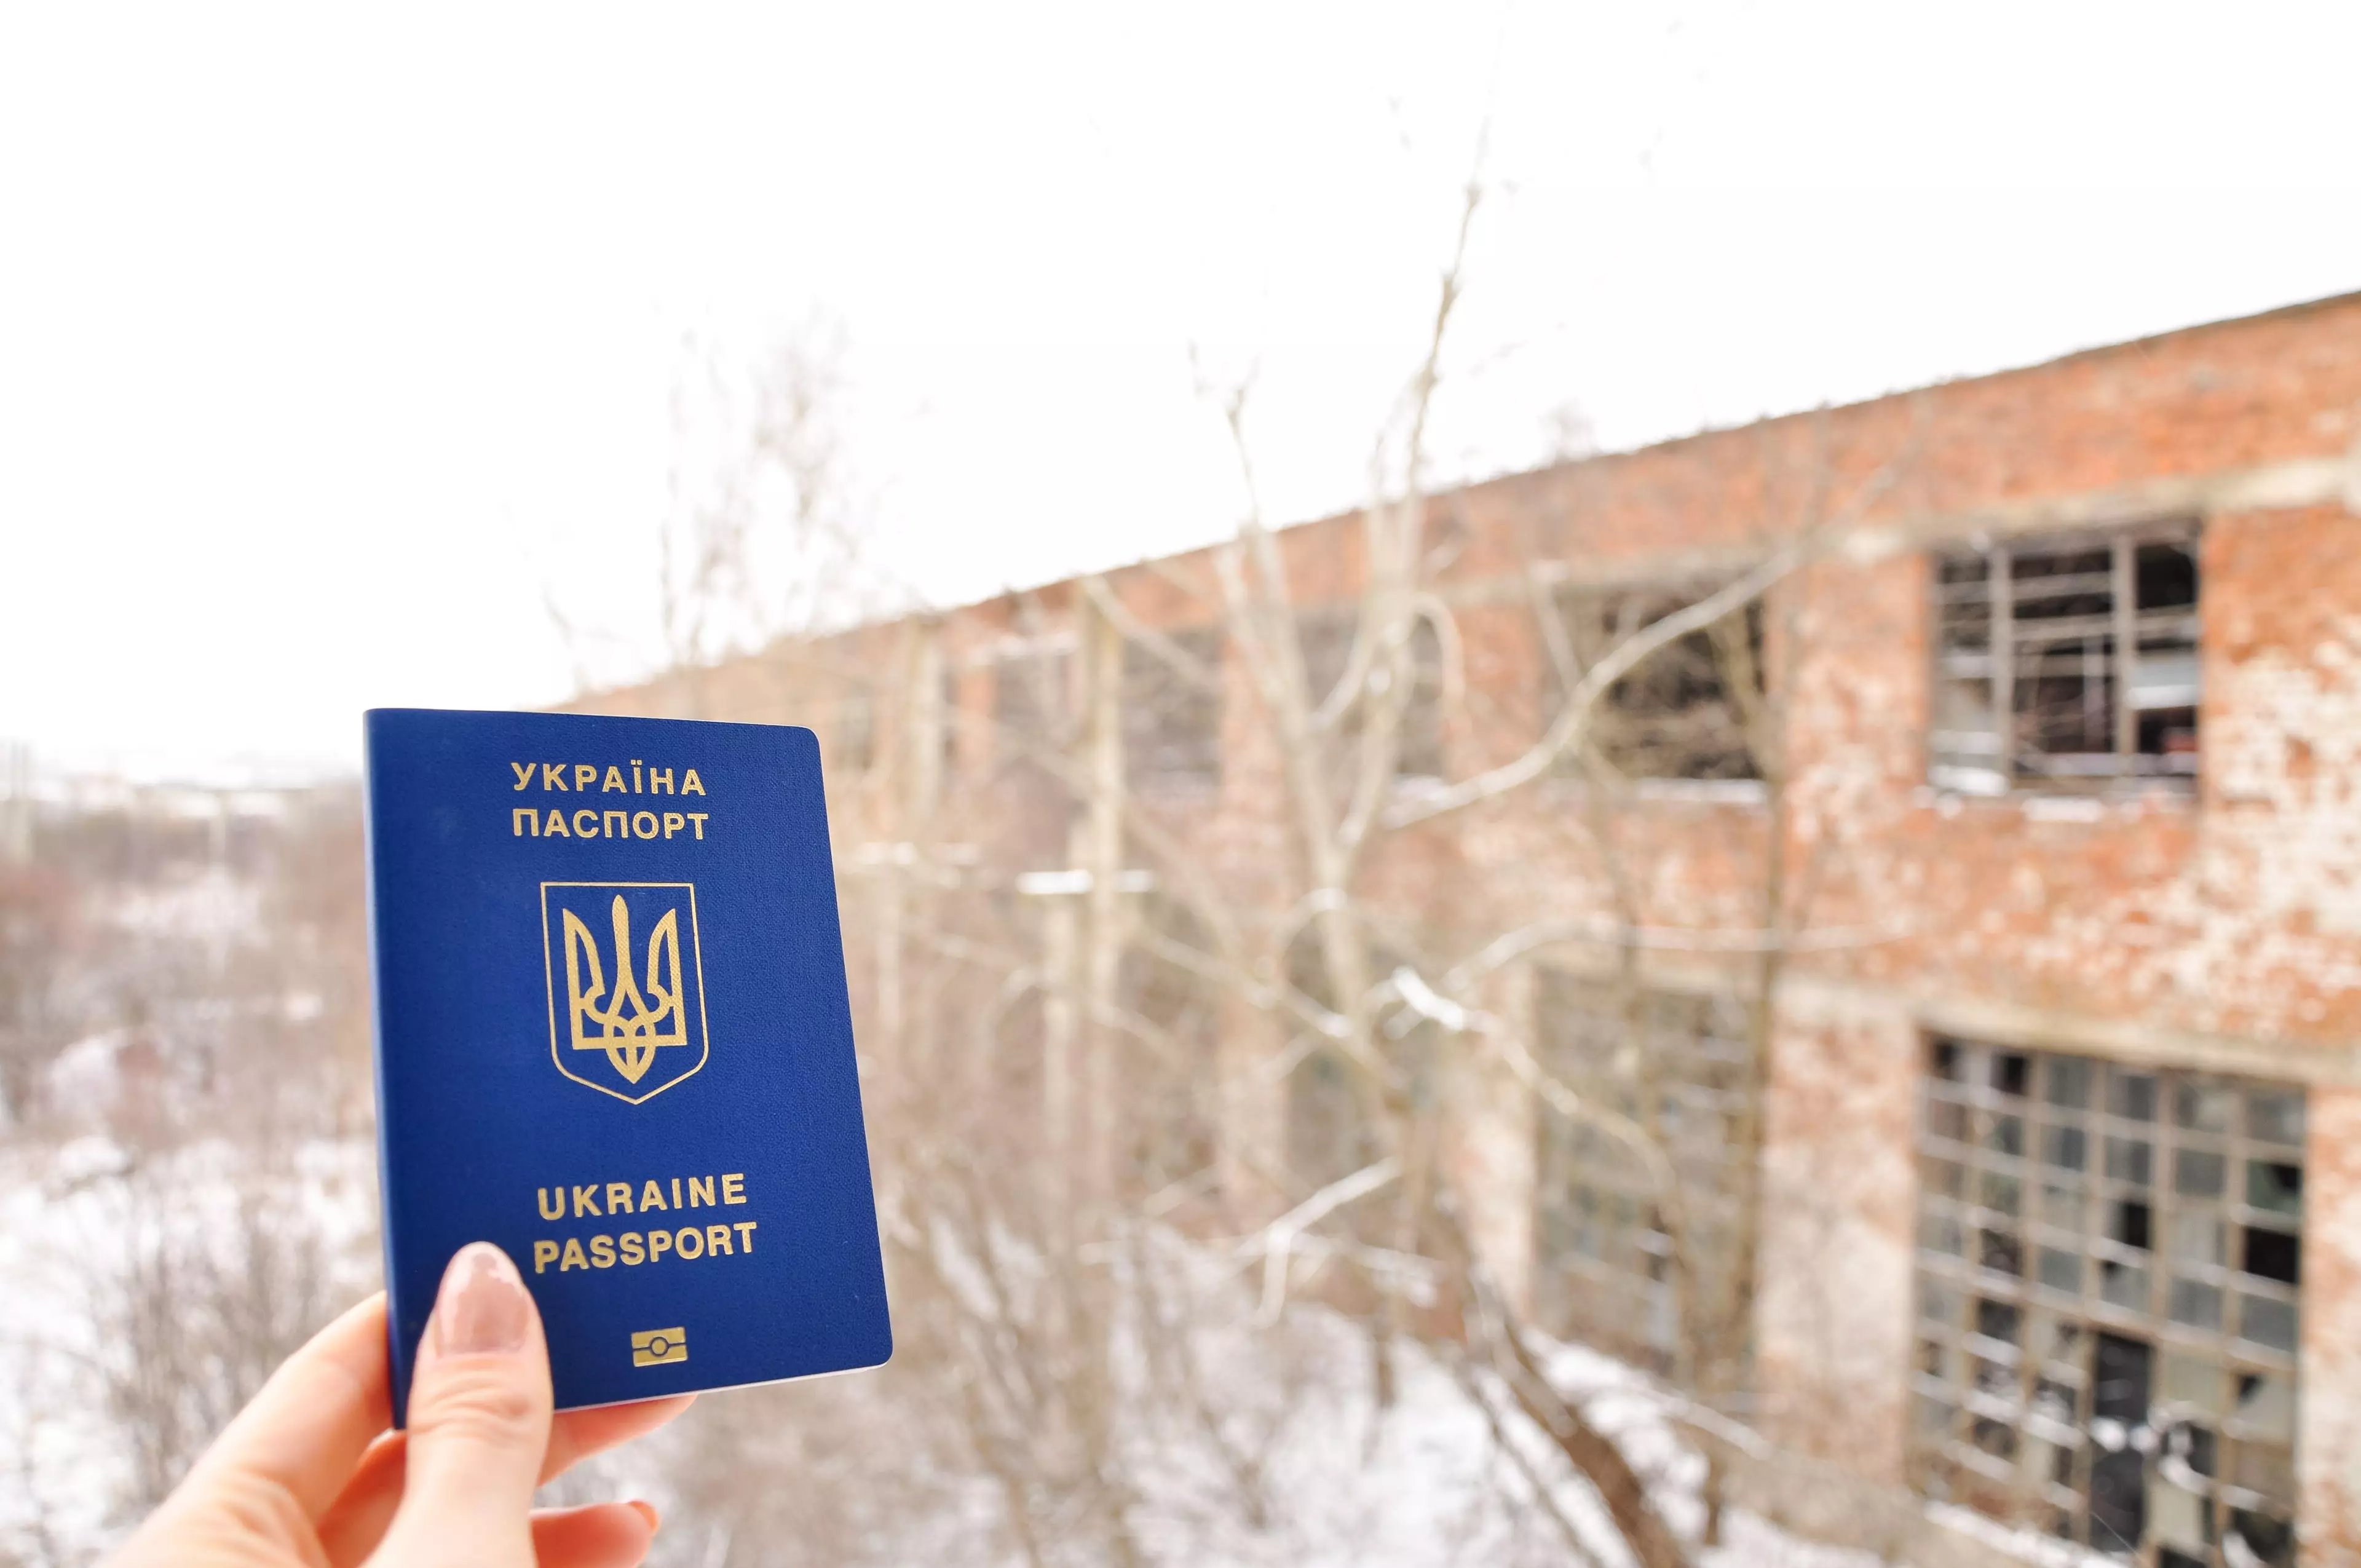 Visas have been waived in many countries for Ukrainian passport holders.